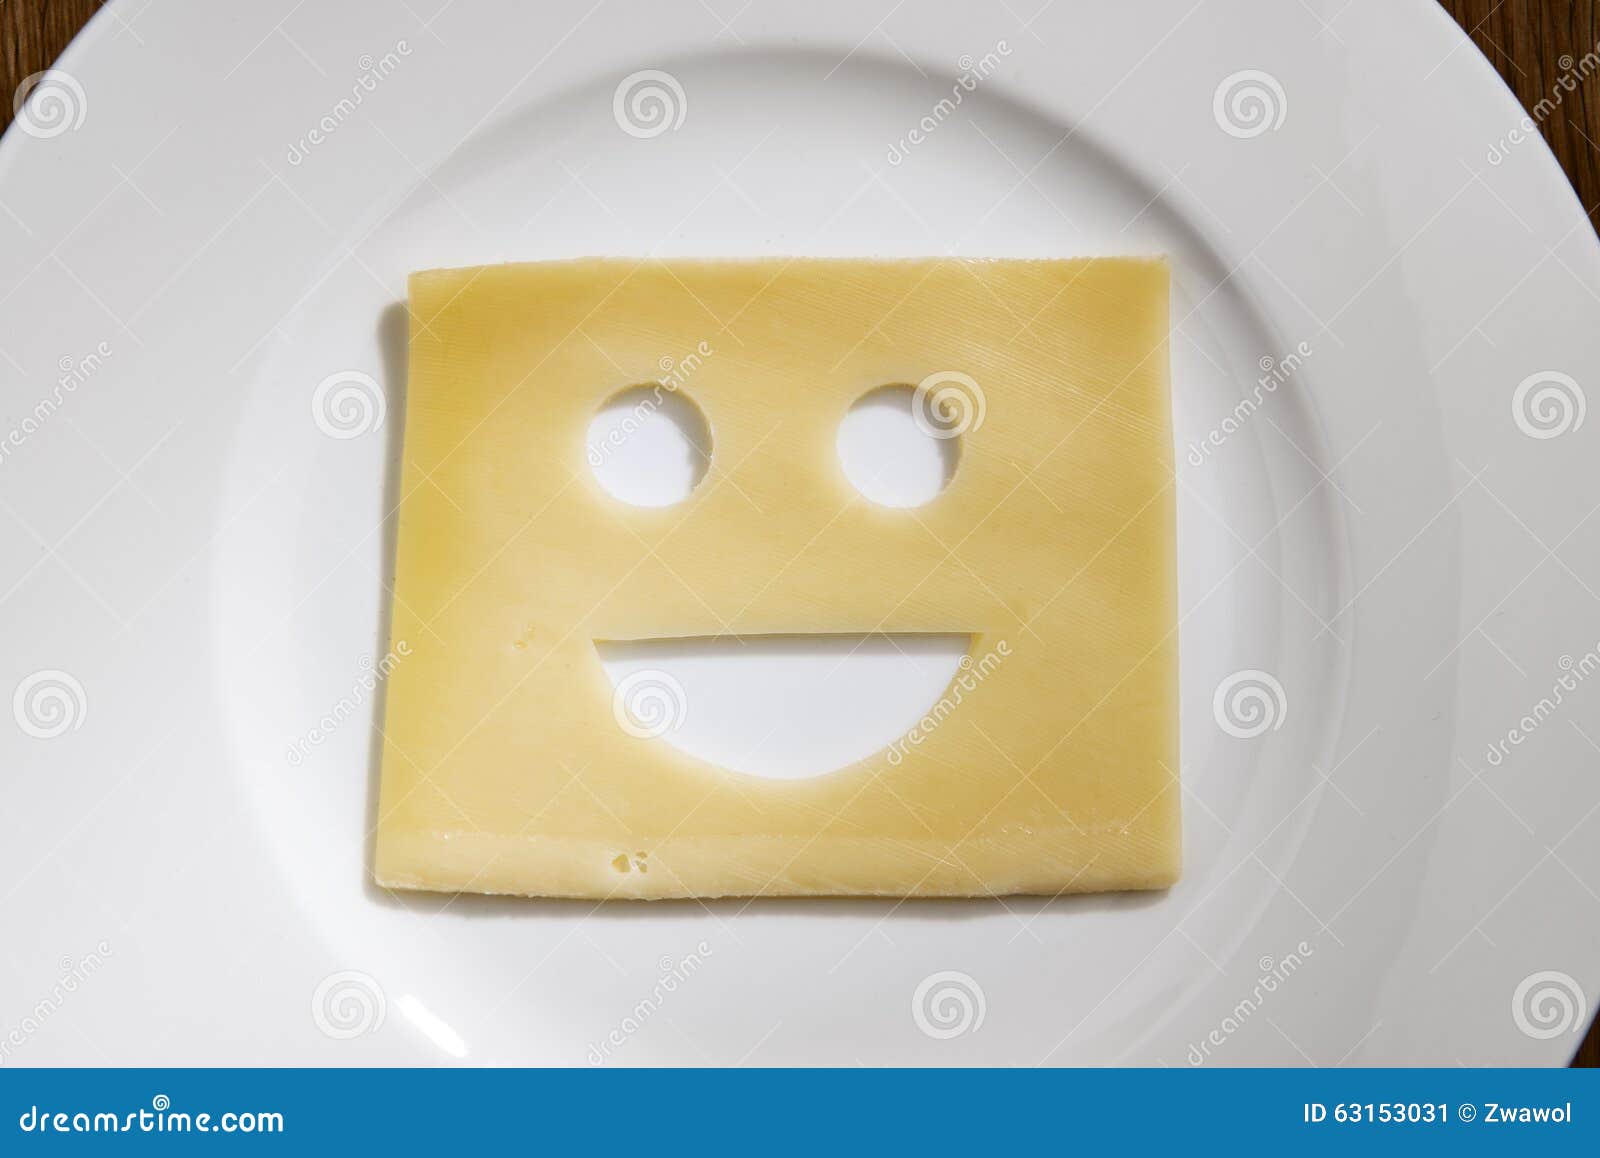 https://thumbs.dreamstime.com/z/cheese-smiling-face-table-image-slice-white-plate-fork-knife-63153031.jpg